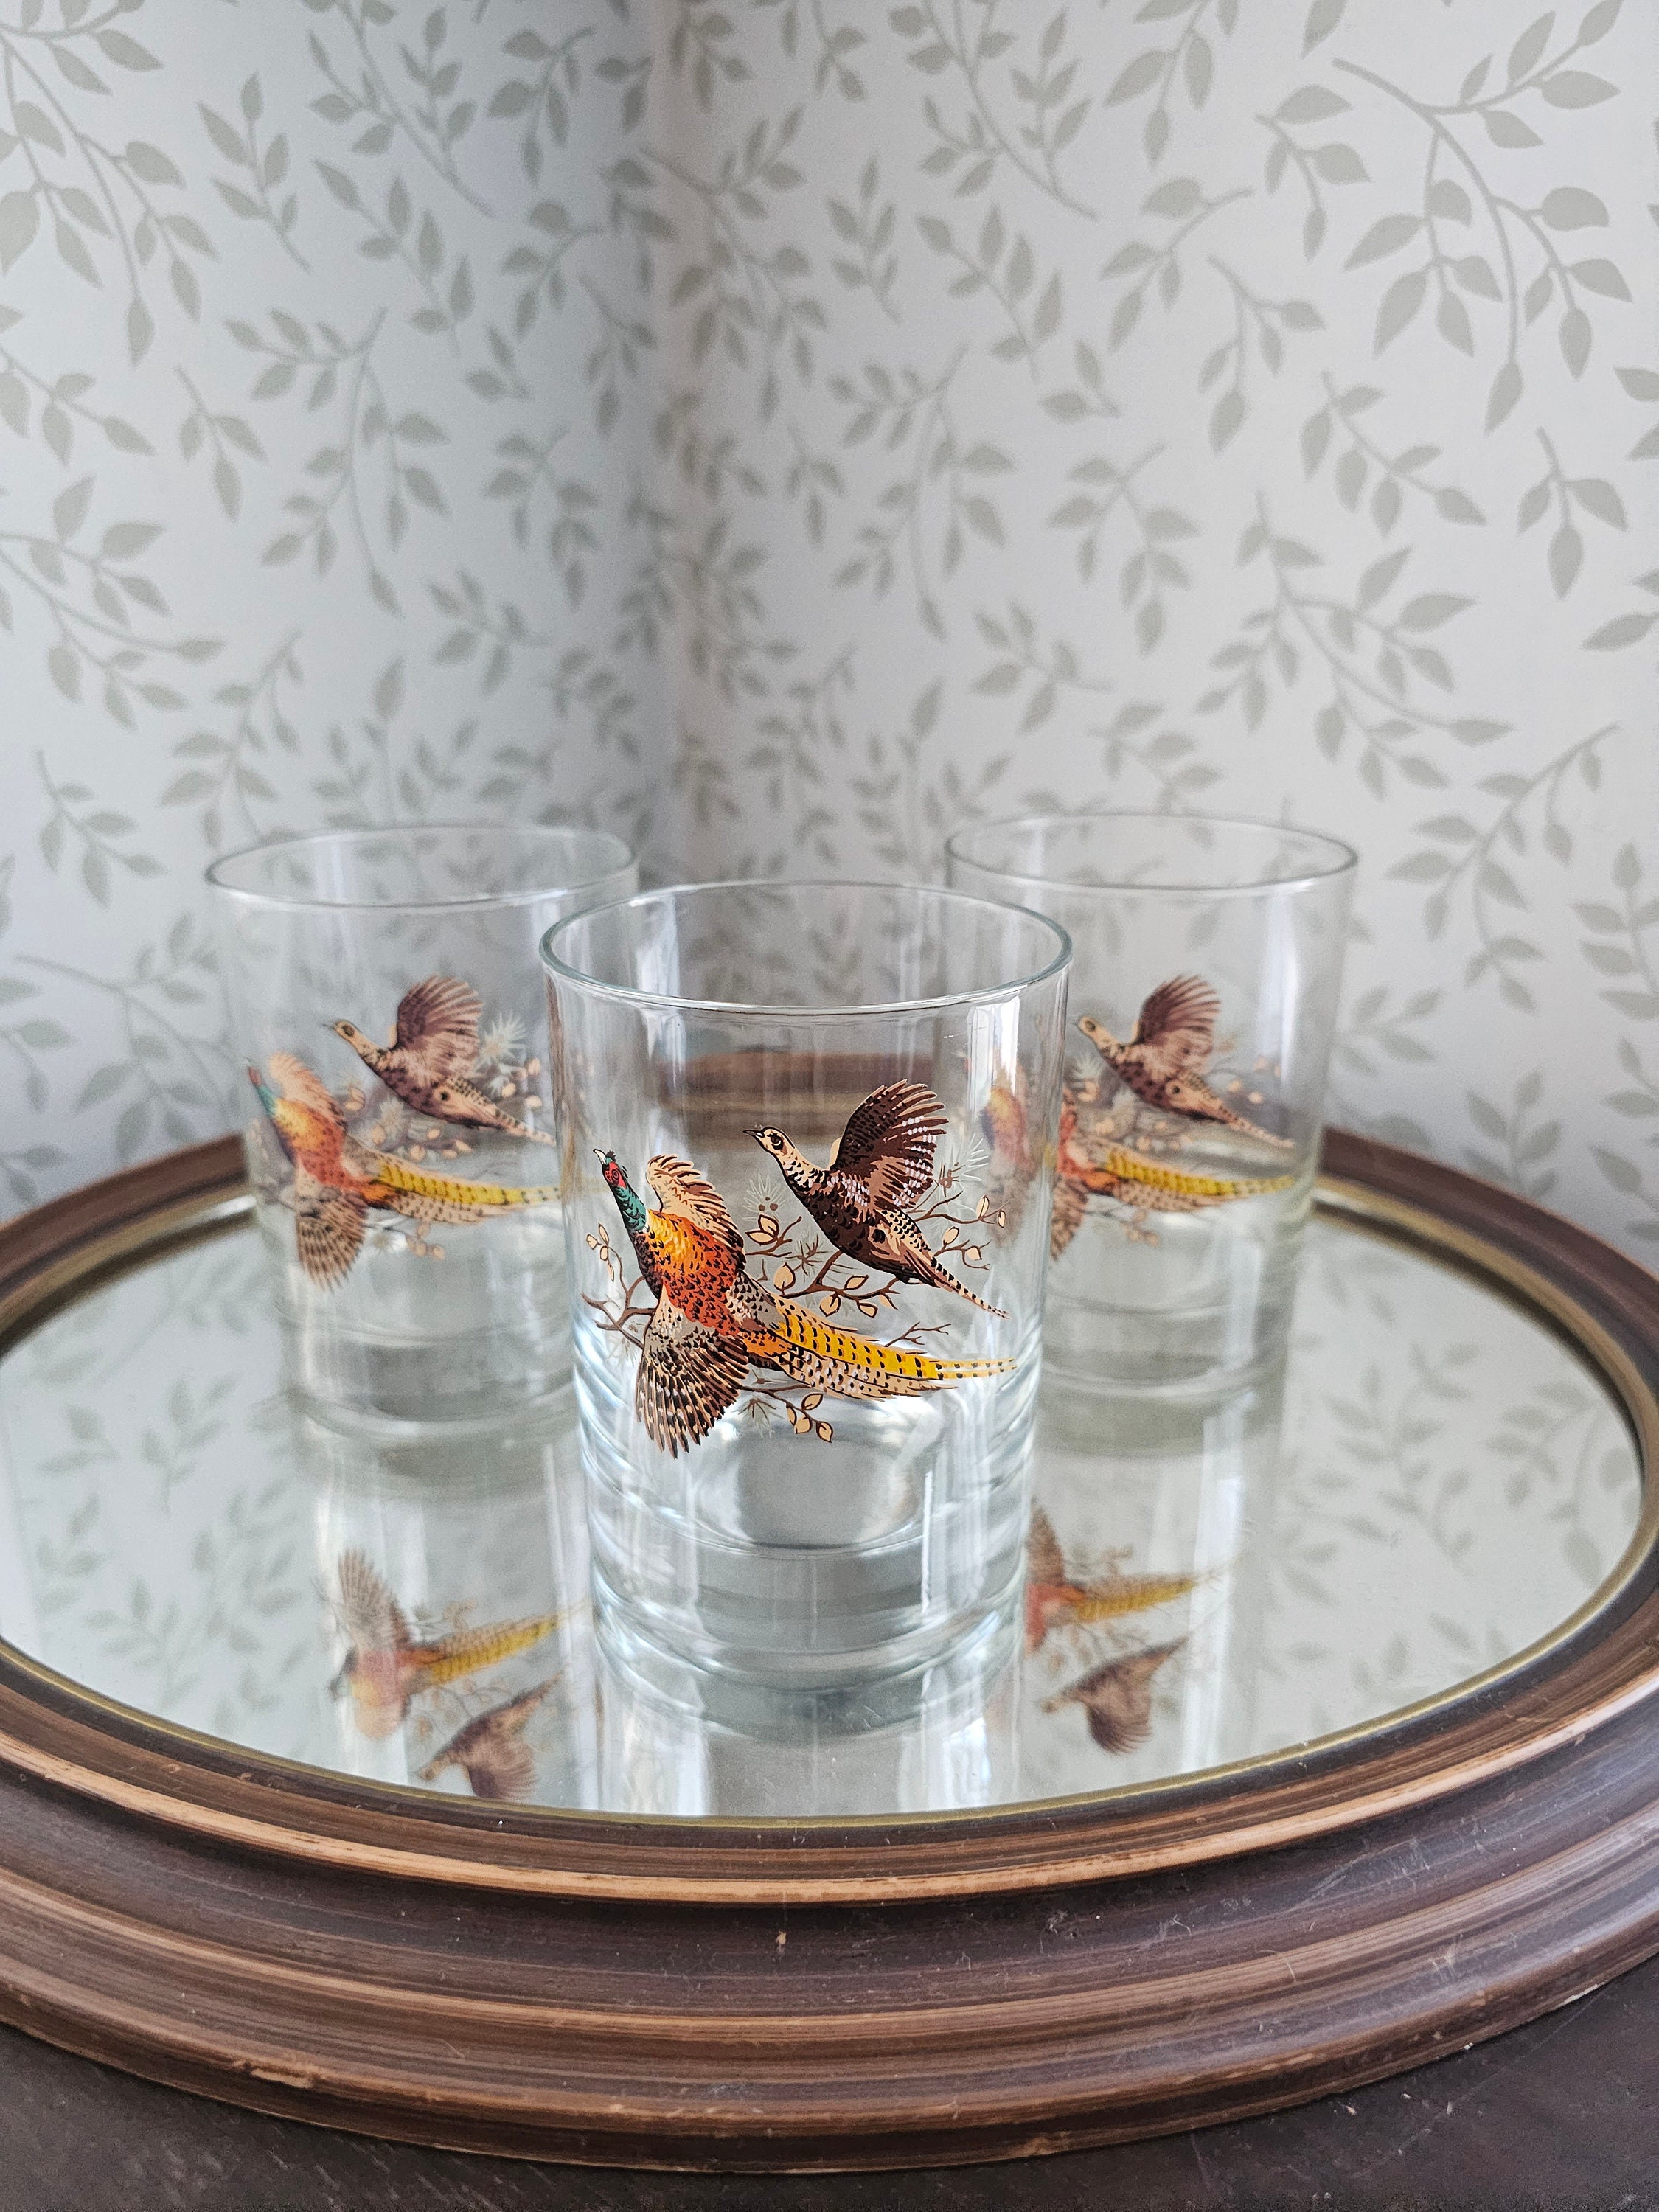 Vintage Large Wild Bird Series Tall Drinking Glasses, Water Glasses, Barware  Glasses, Cabinet Decor, Collectible Glassware-set of Six 